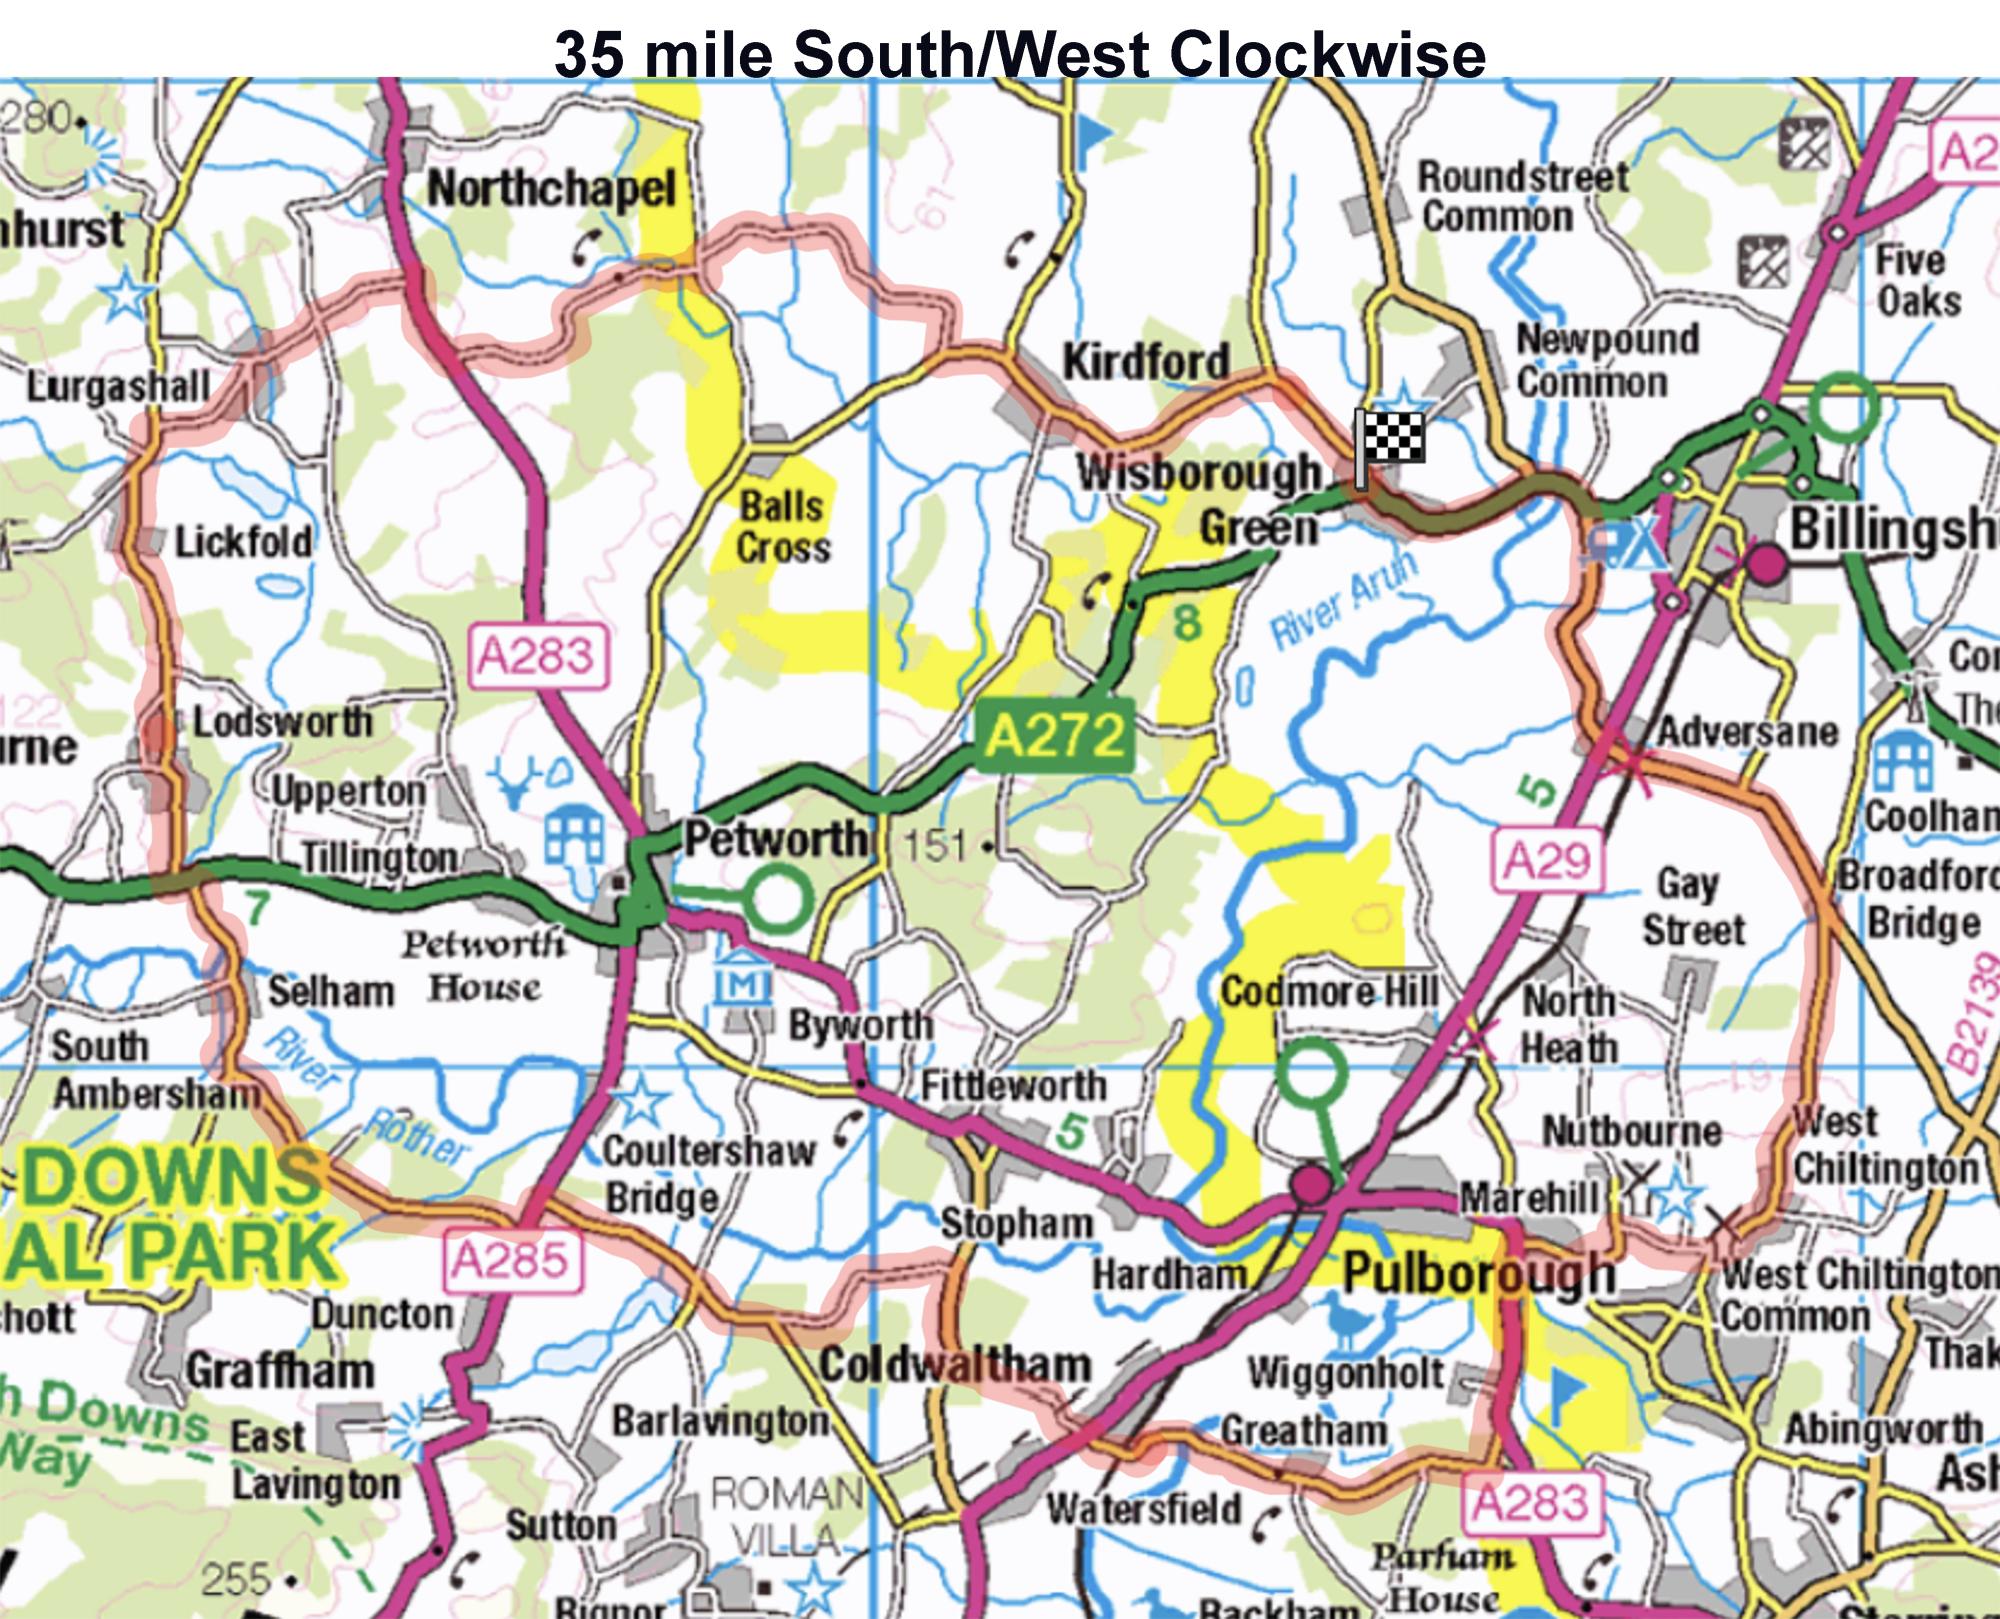 Clockwise South/West 38 mile route